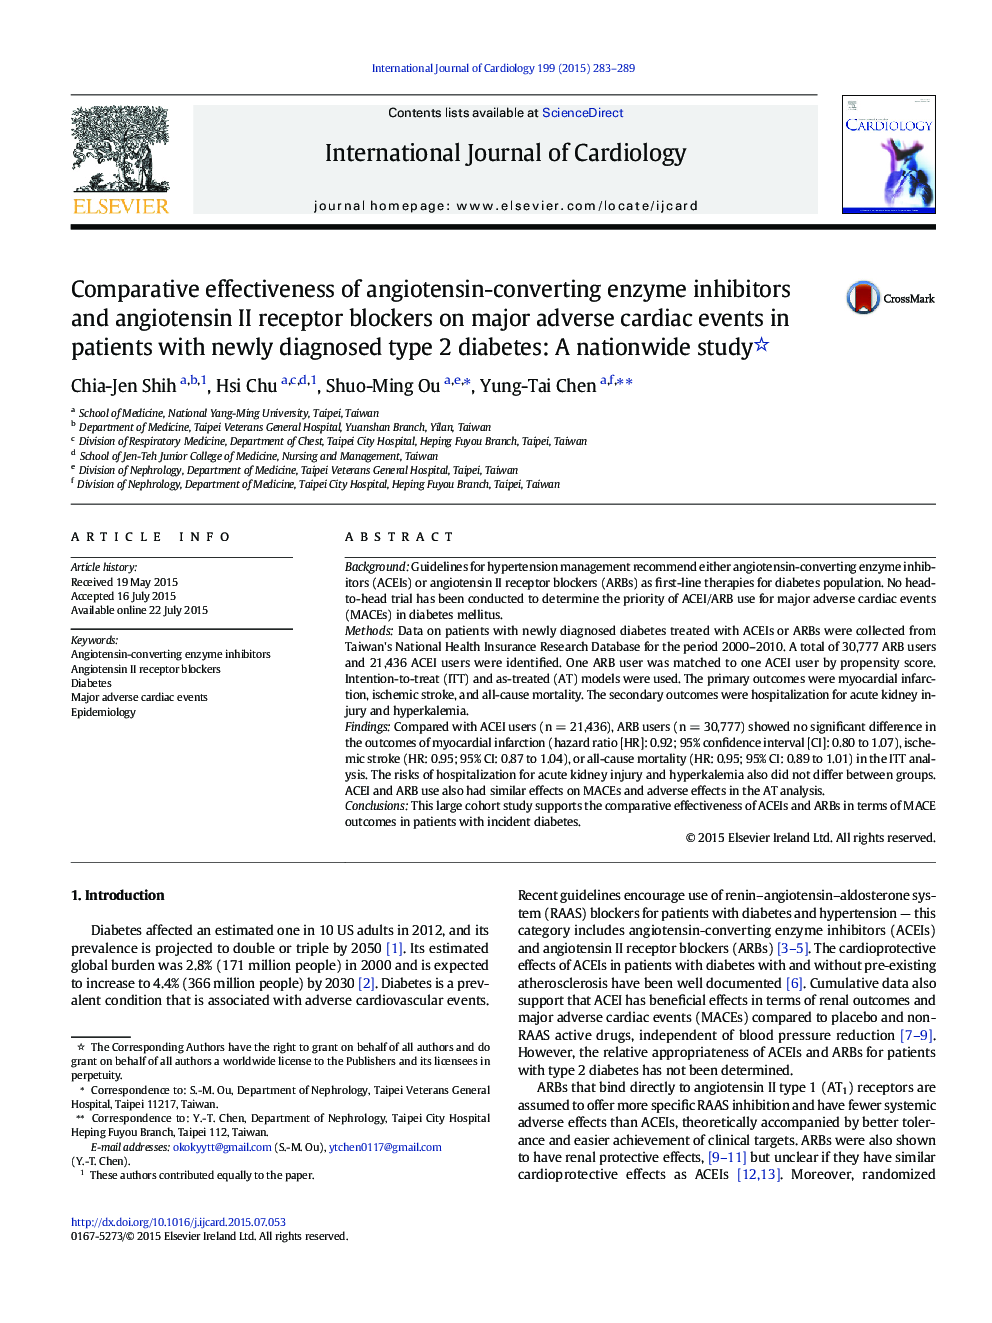 Comparative effectiveness of angiotensin-converting enzyme inhibitors and angiotensin II receptor blockers on major adverse cardiac events in patients with newly diagnosed type 2 diabetes: A nationwide study